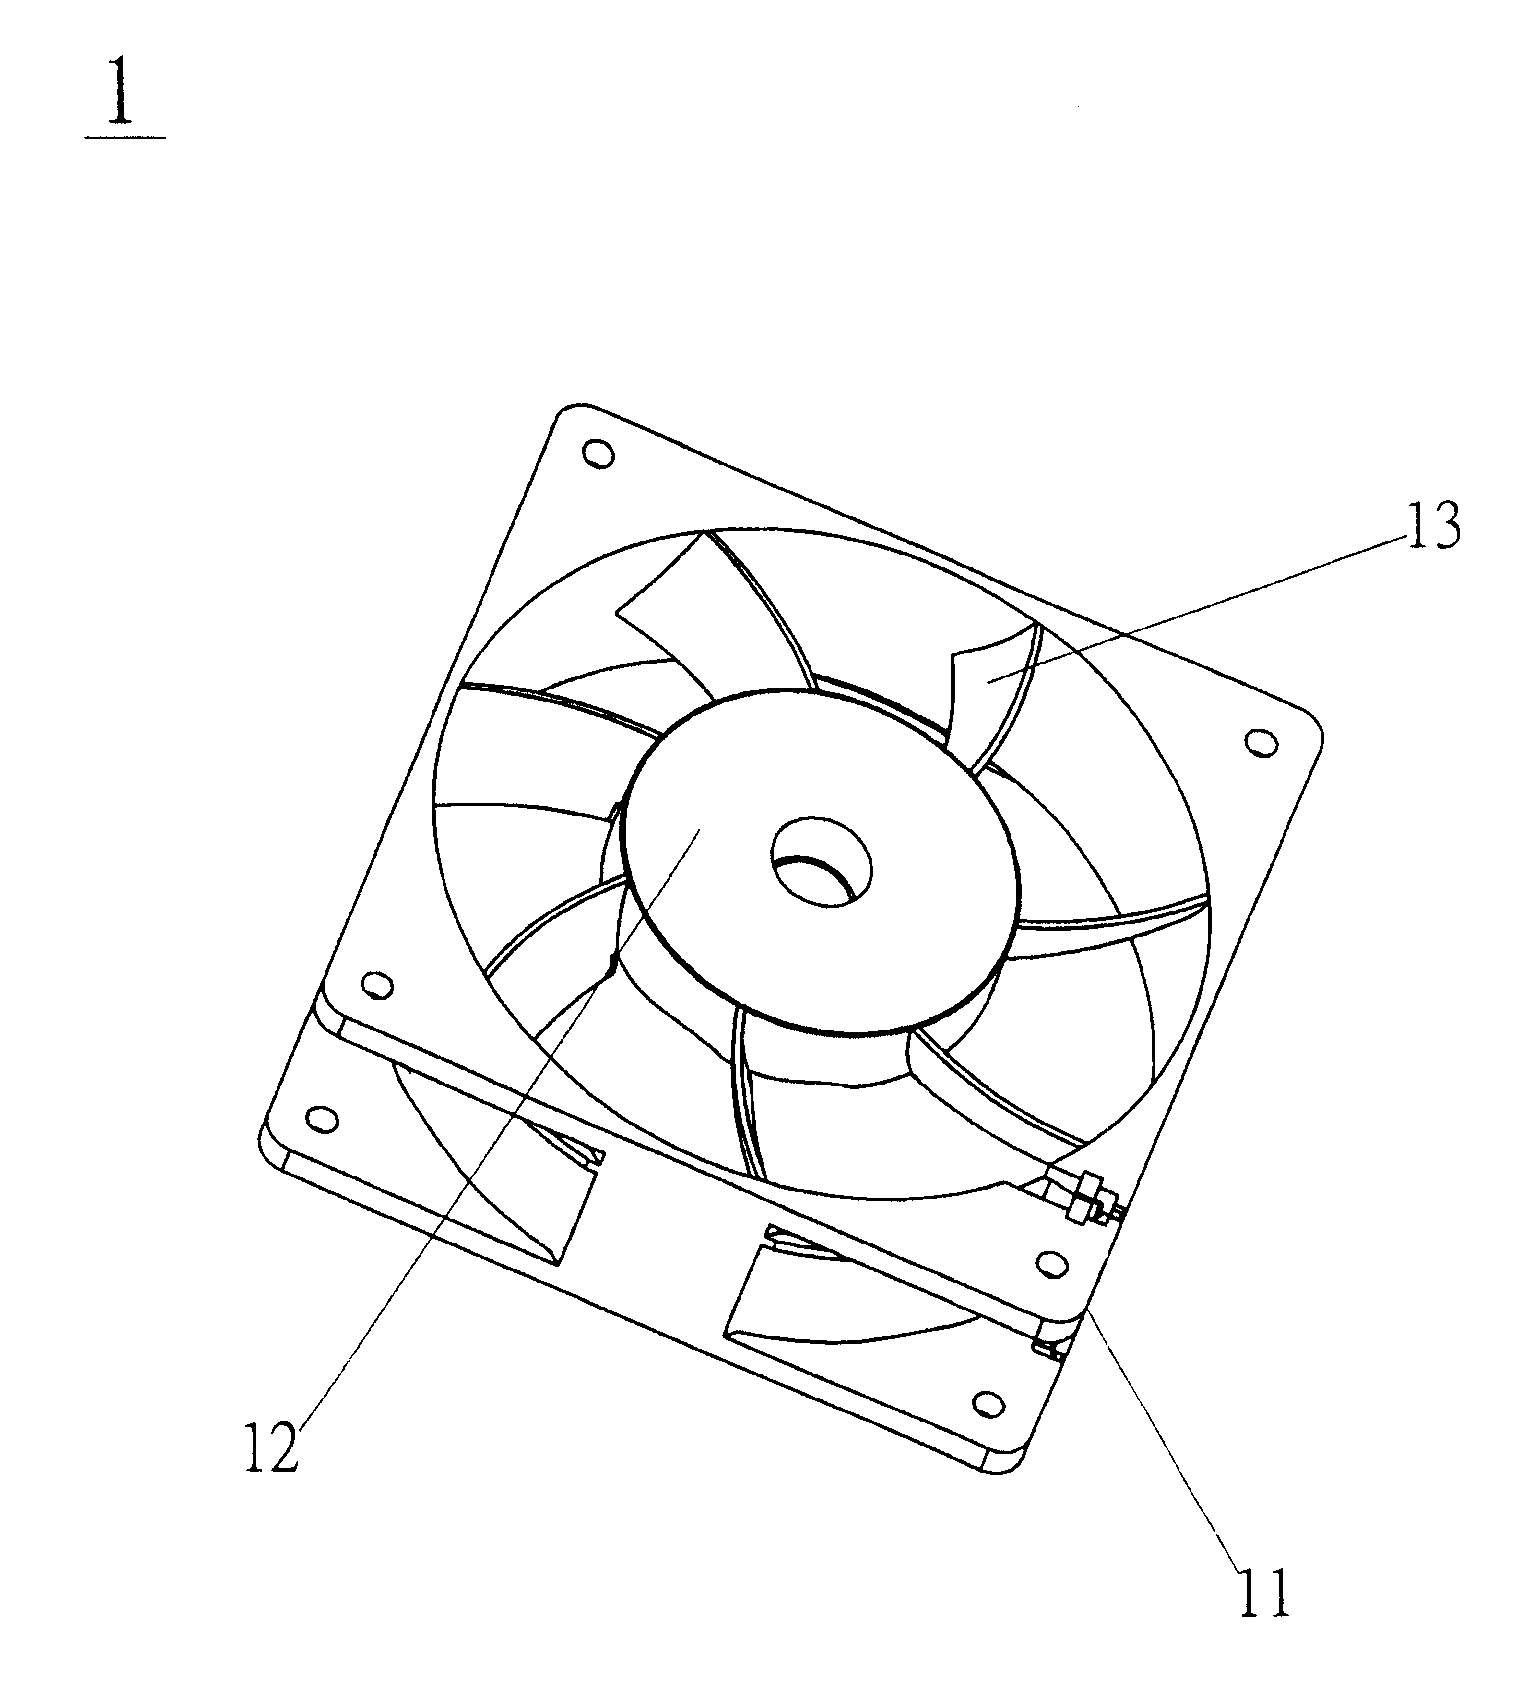 Fan and frame thereof